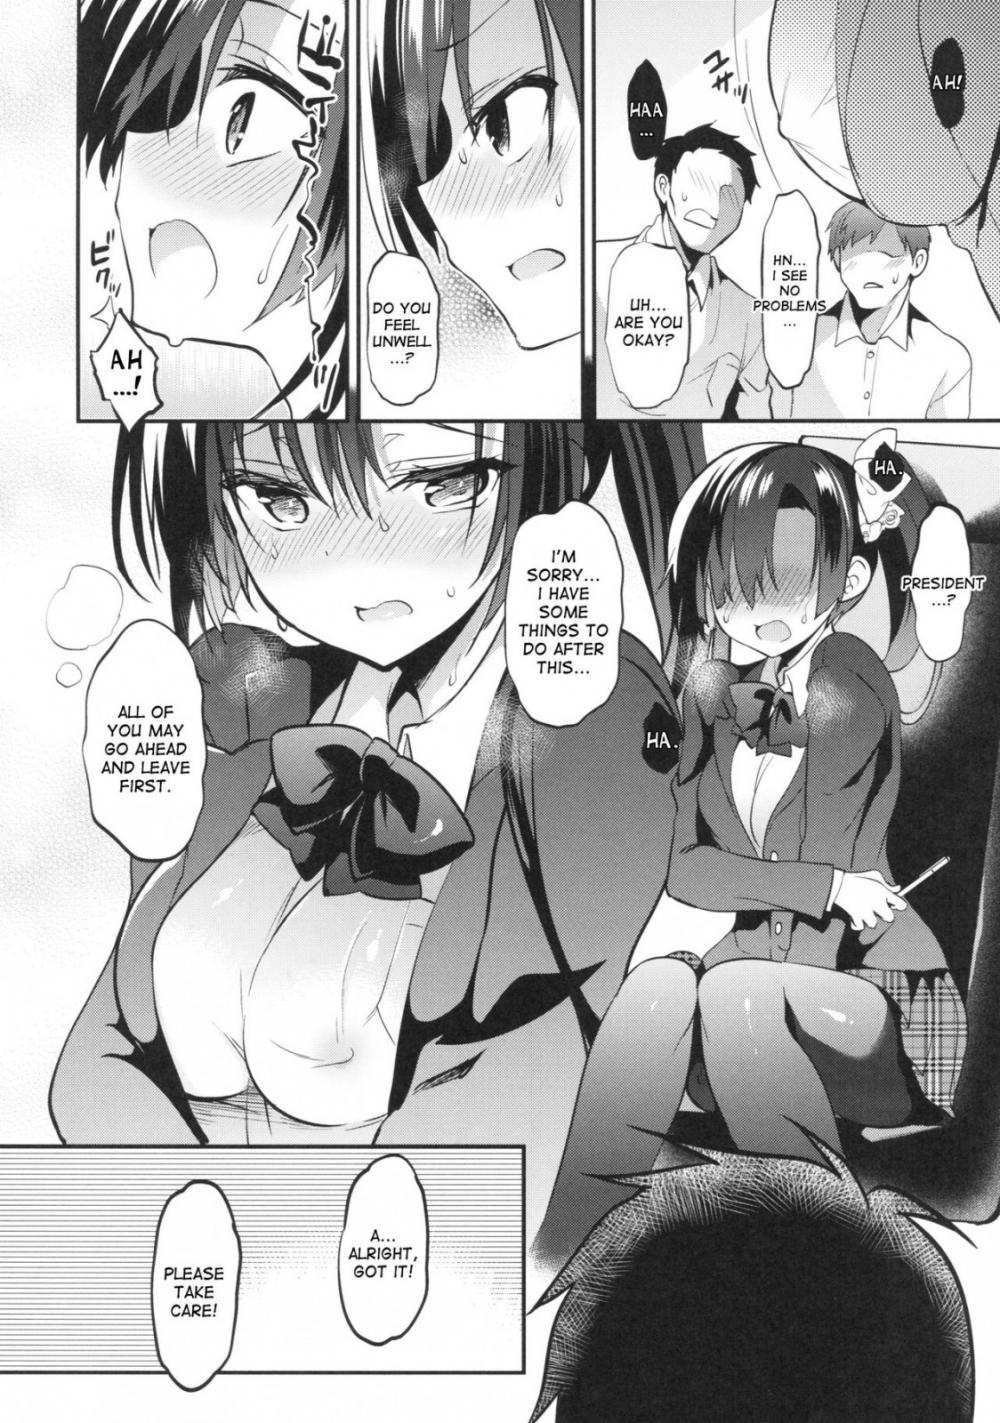 Hentai Manga Comic-School In The Spring of Youth 13-Read-5